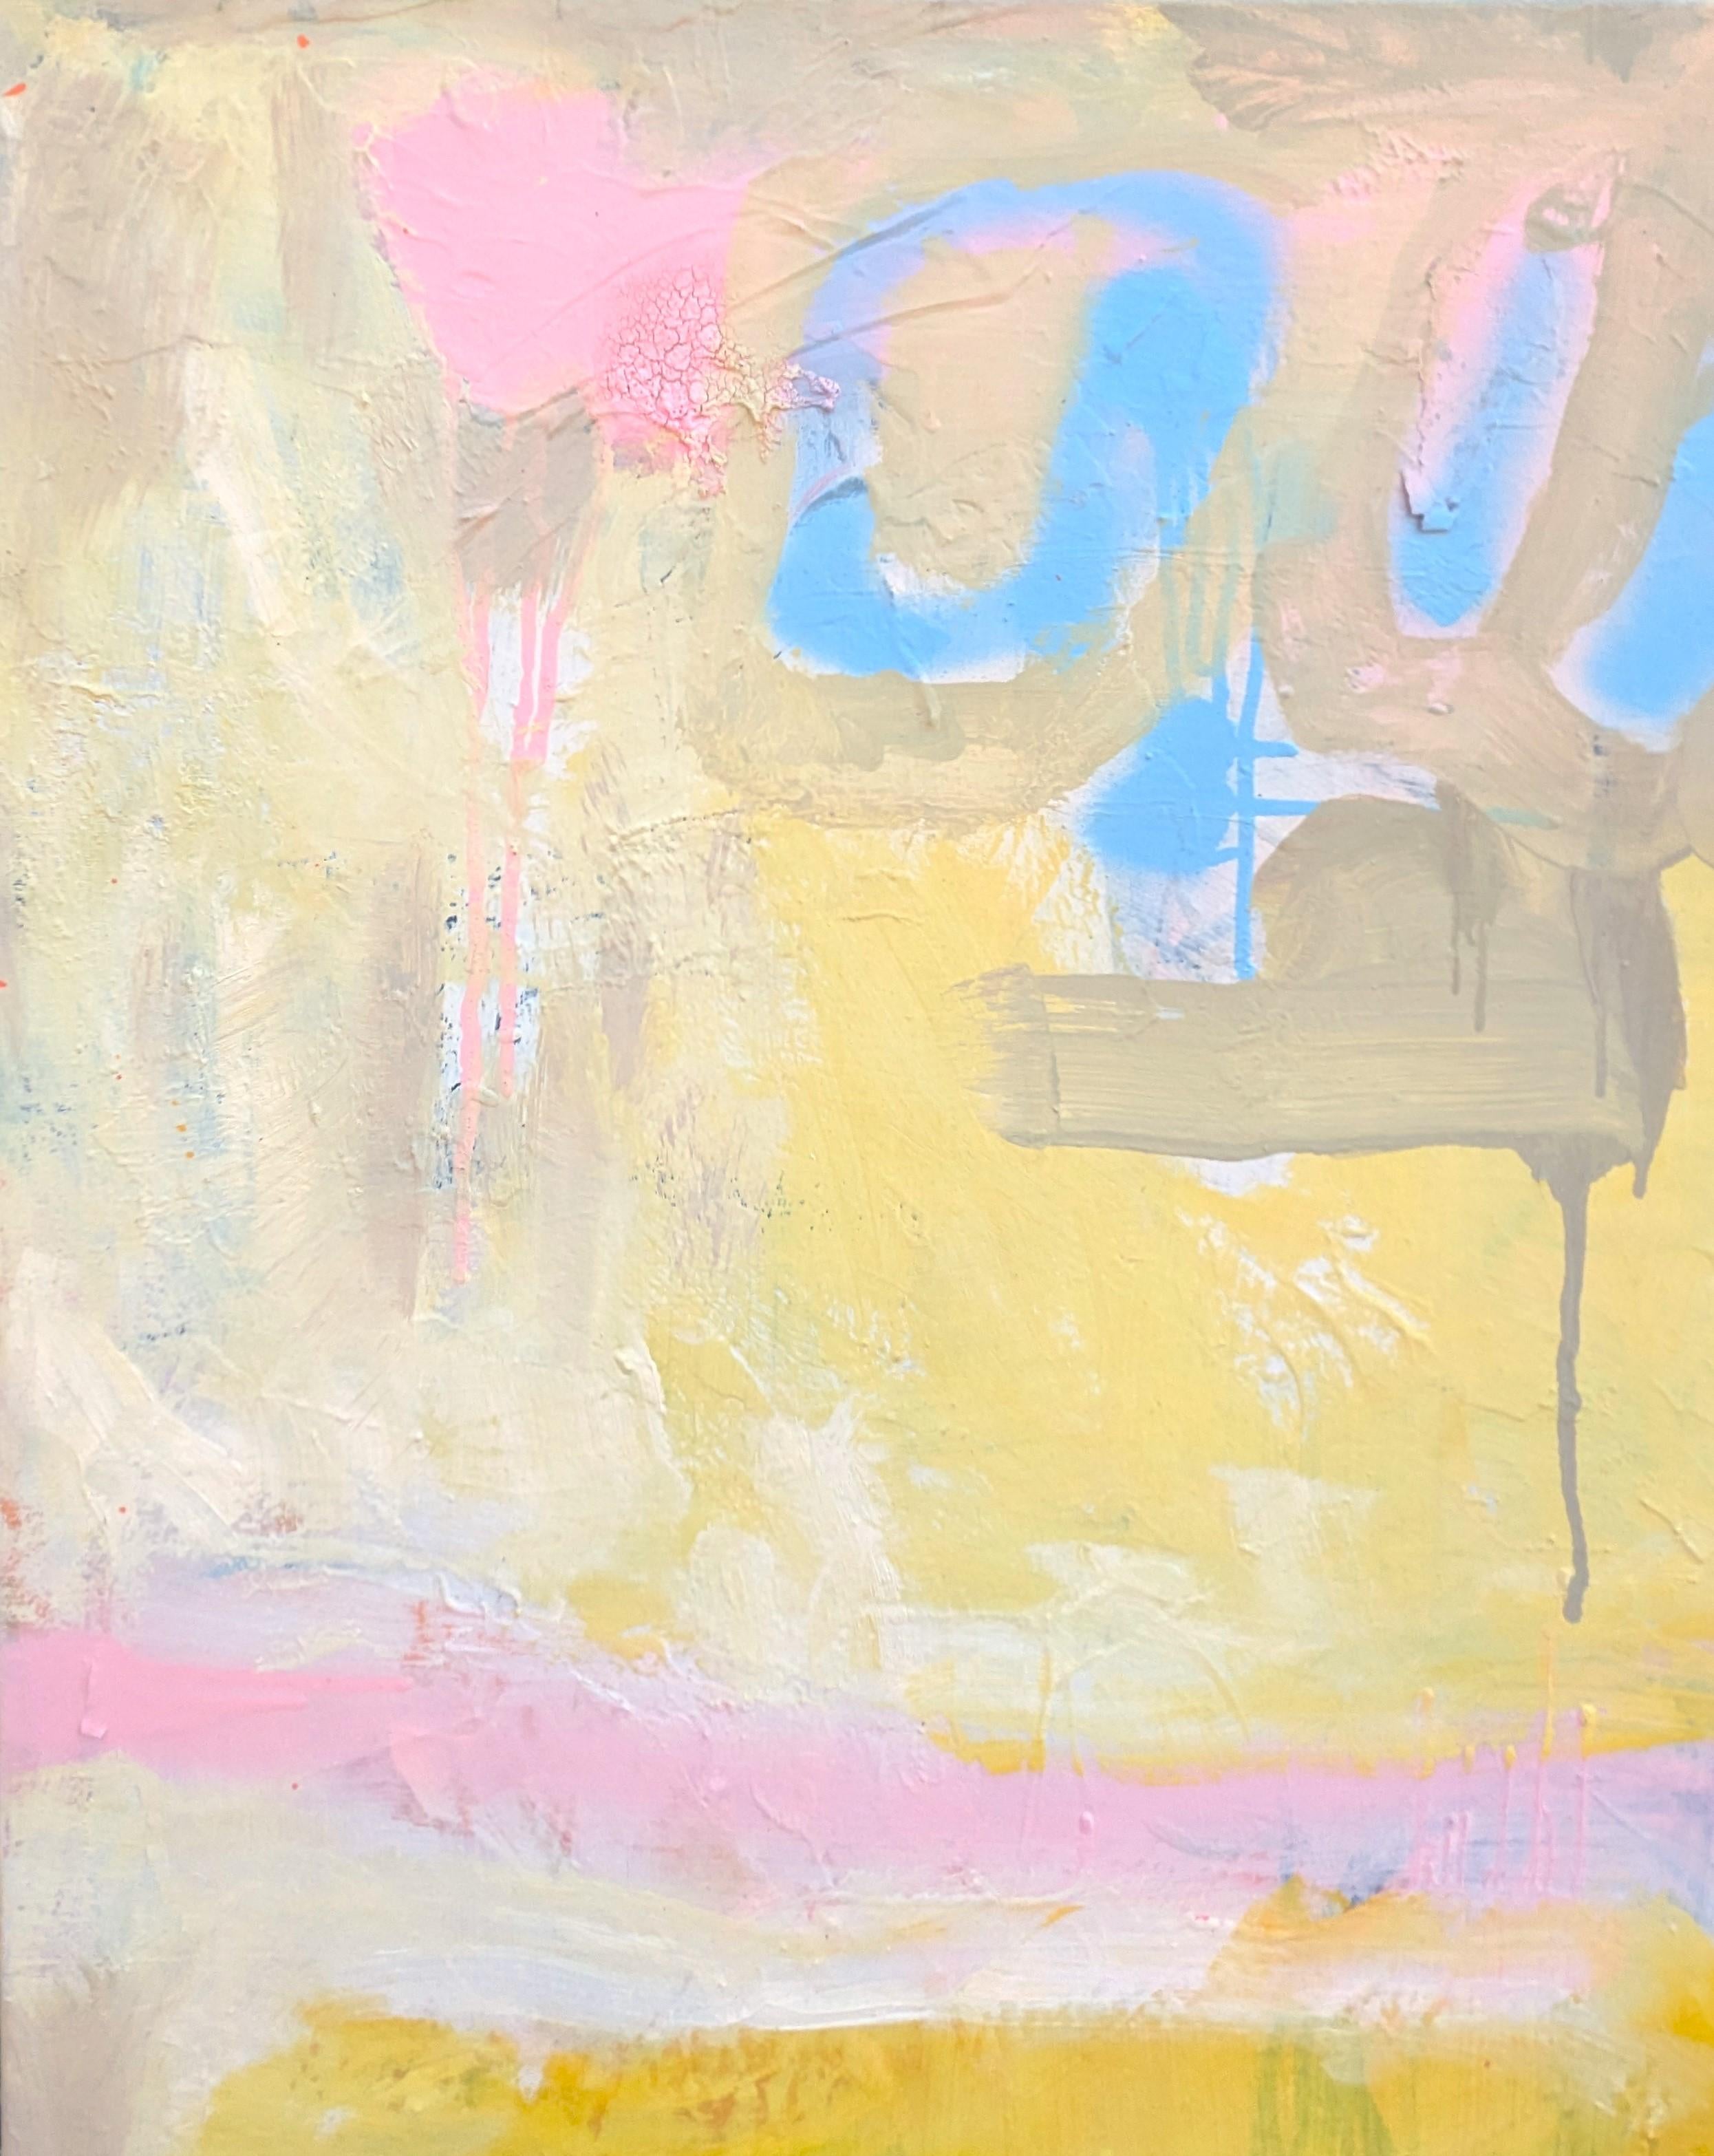 Abstract expressionist oil painting by contemporary Houston artist Benji Stiles. The work features gestural marks in pastel pink, blue, and yellow set against a tan background. Currently unframed, but options are available.

Artist Biography: Born